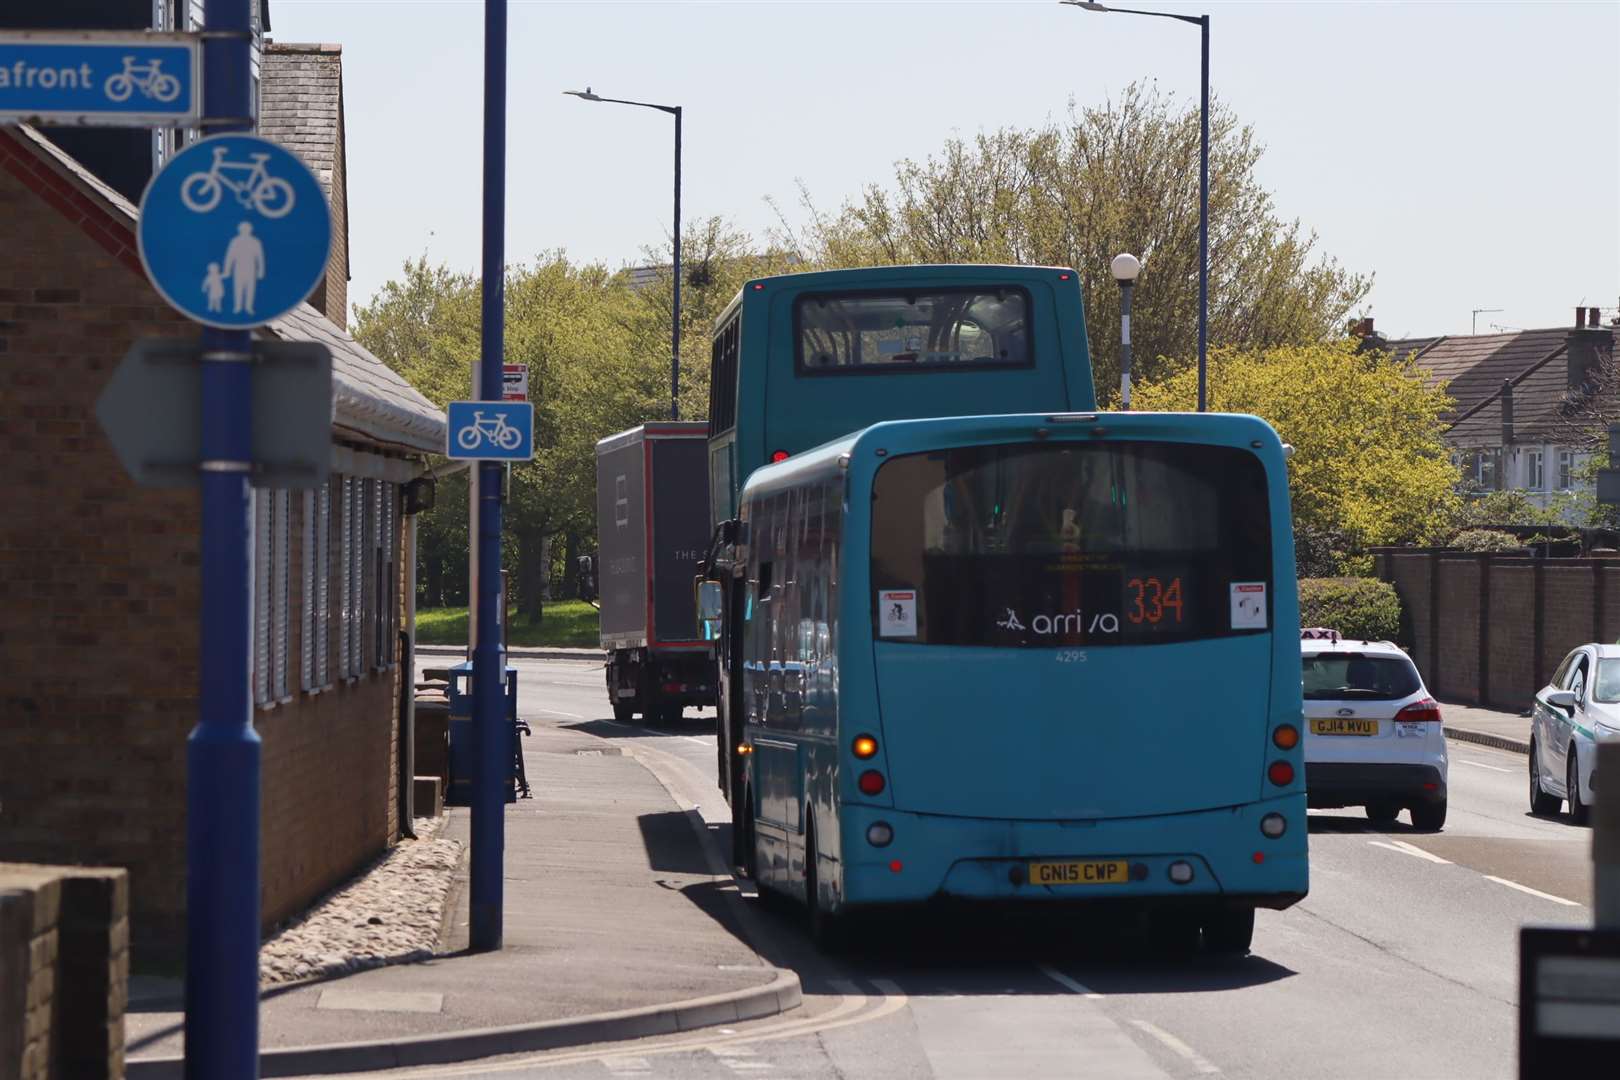 Arriva buses in Sheerness